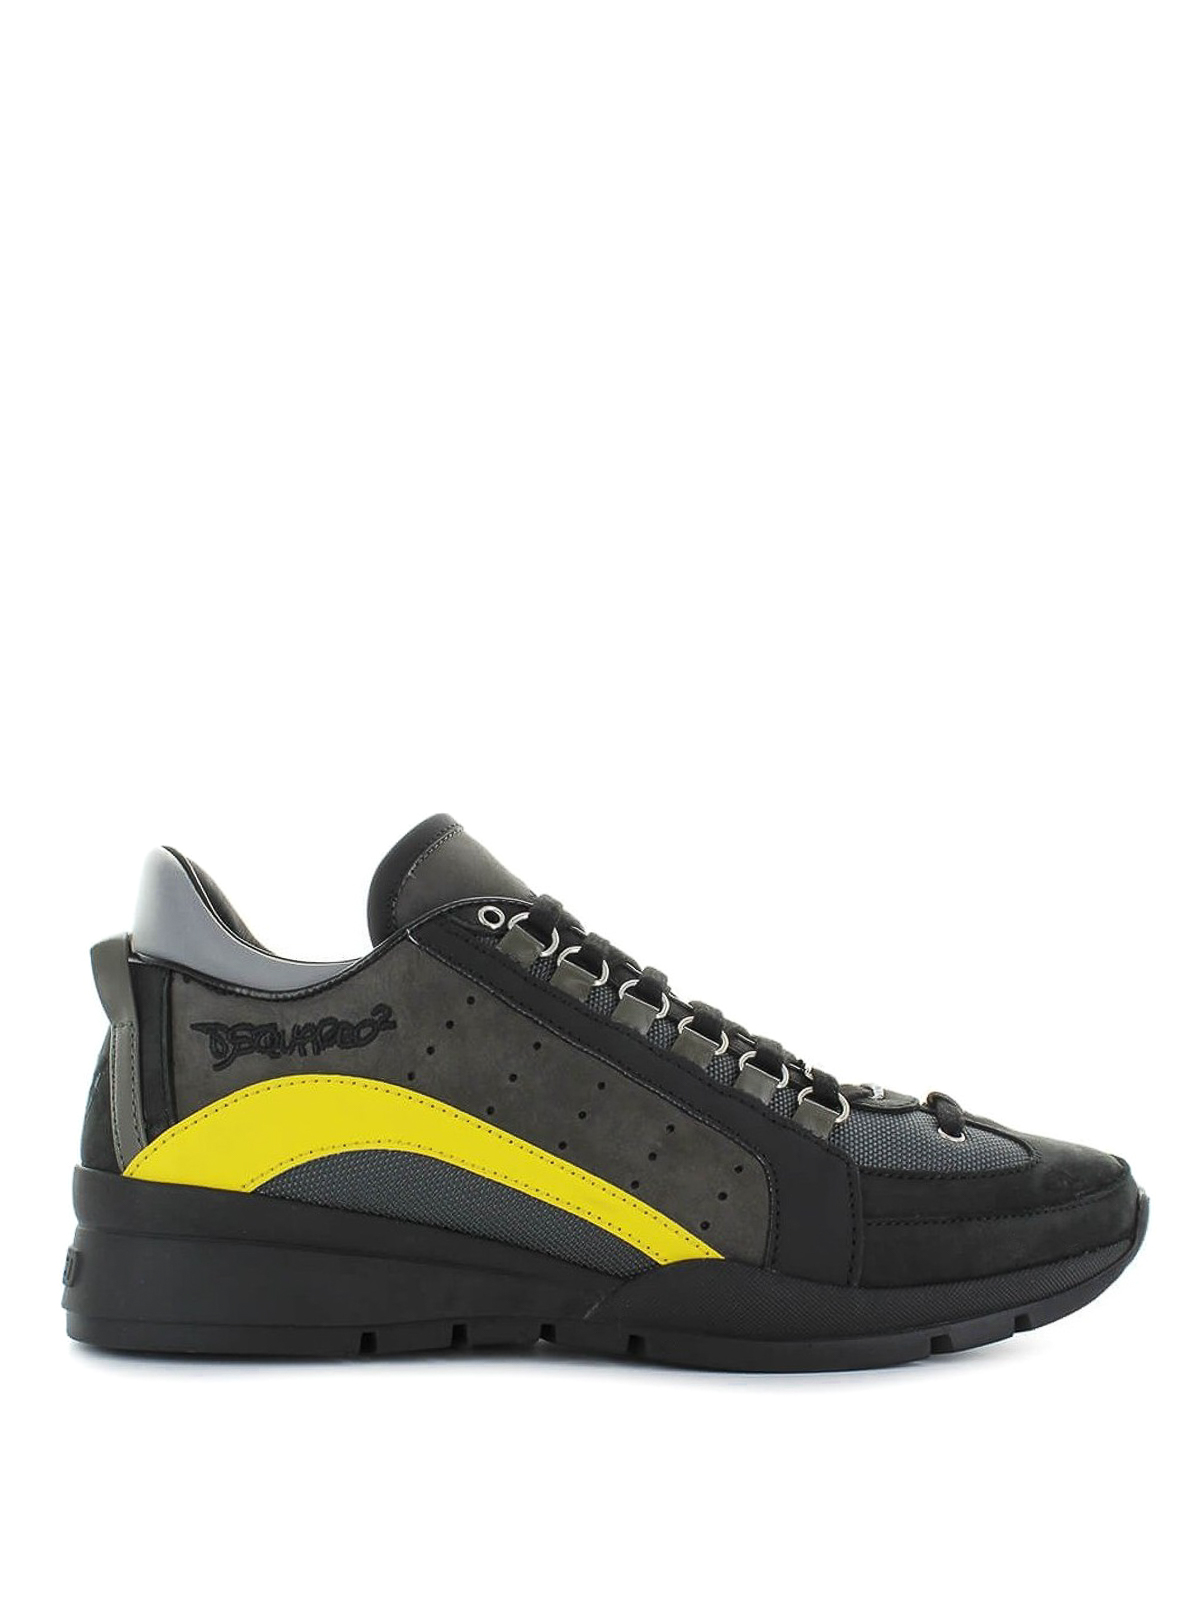 551 black and yellow sneakers 